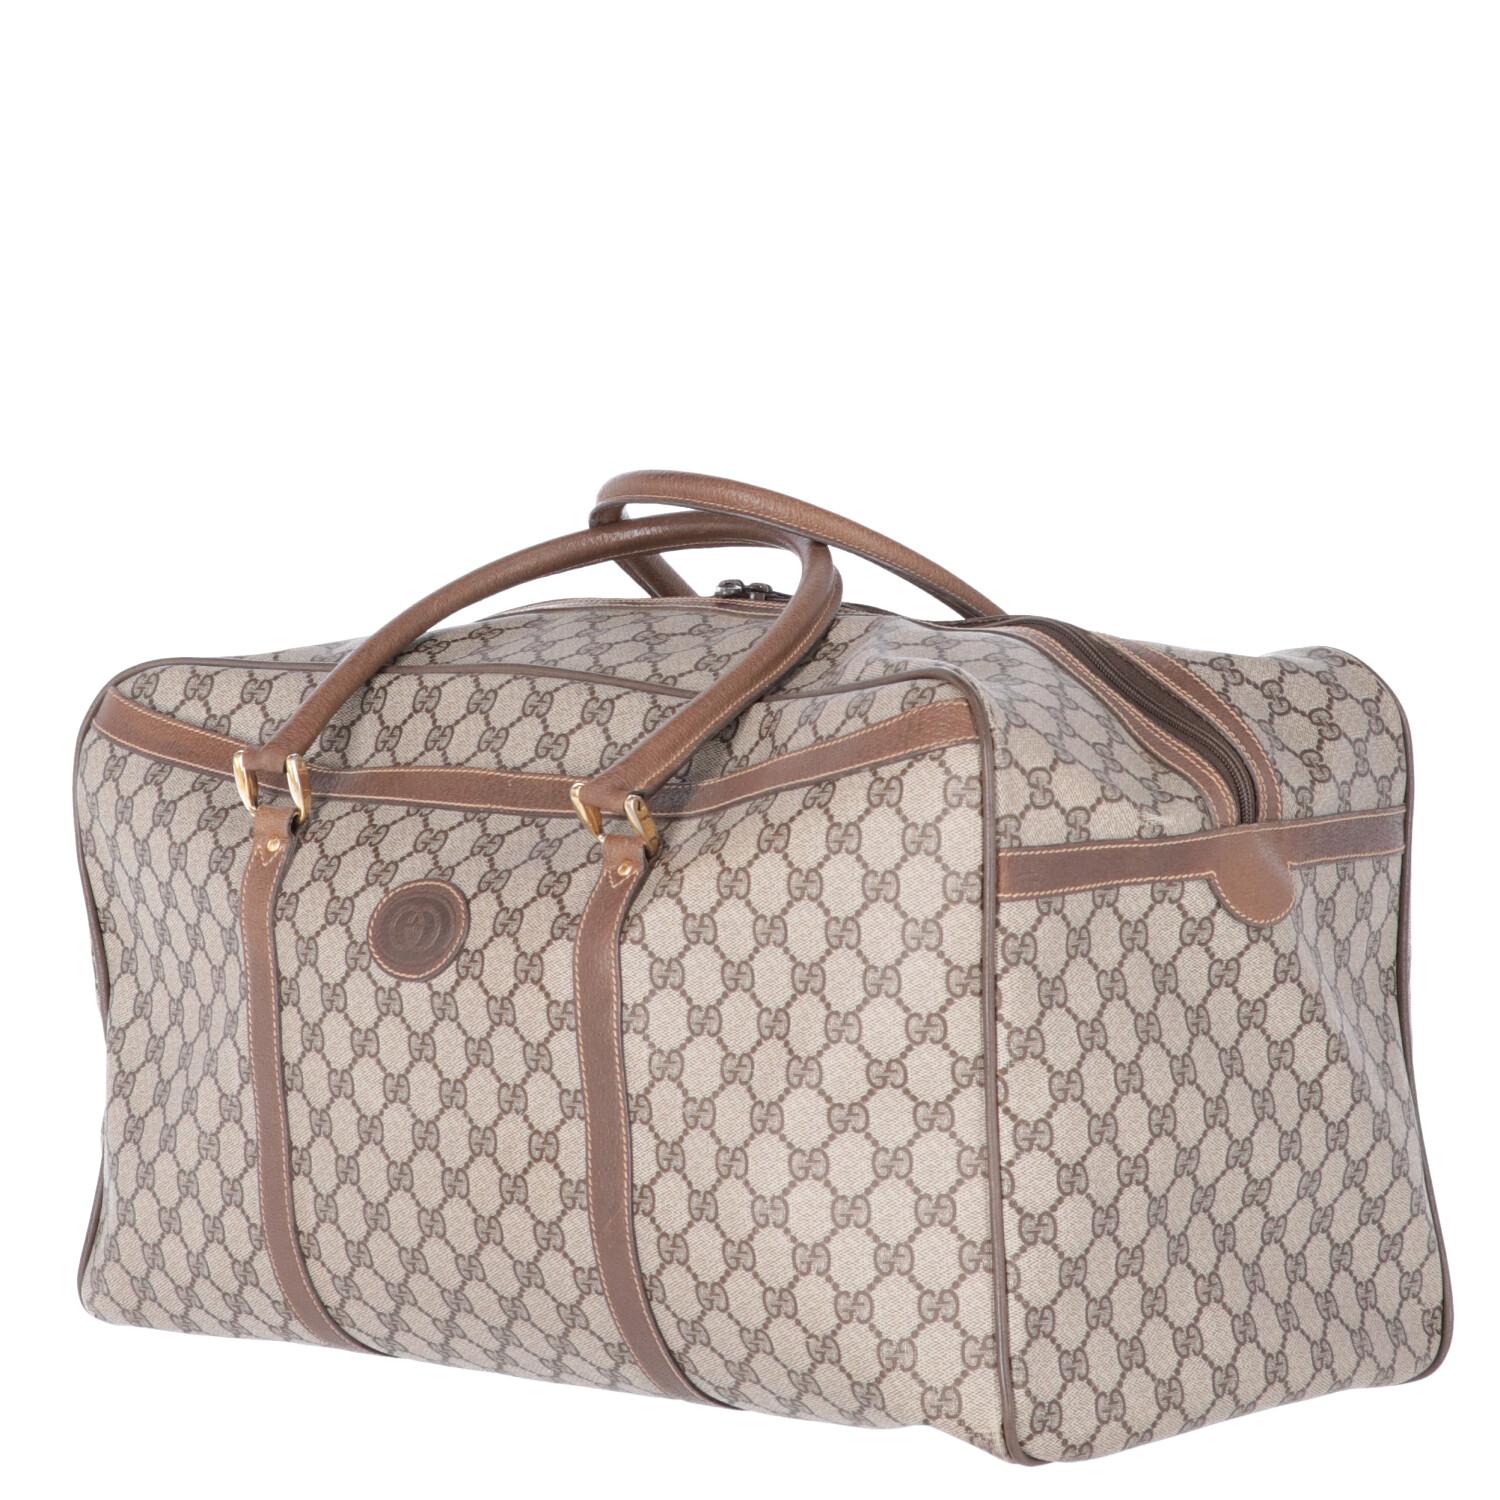 A.N.G.E.L.O. Vintage - ITALY 

Gucci GG monogram canvas travel bag with brown leather details. Double slider zip closure, two rigid handles and metal feet on the bottom. Large external pocket and one internal with zip.

The product has some signs of